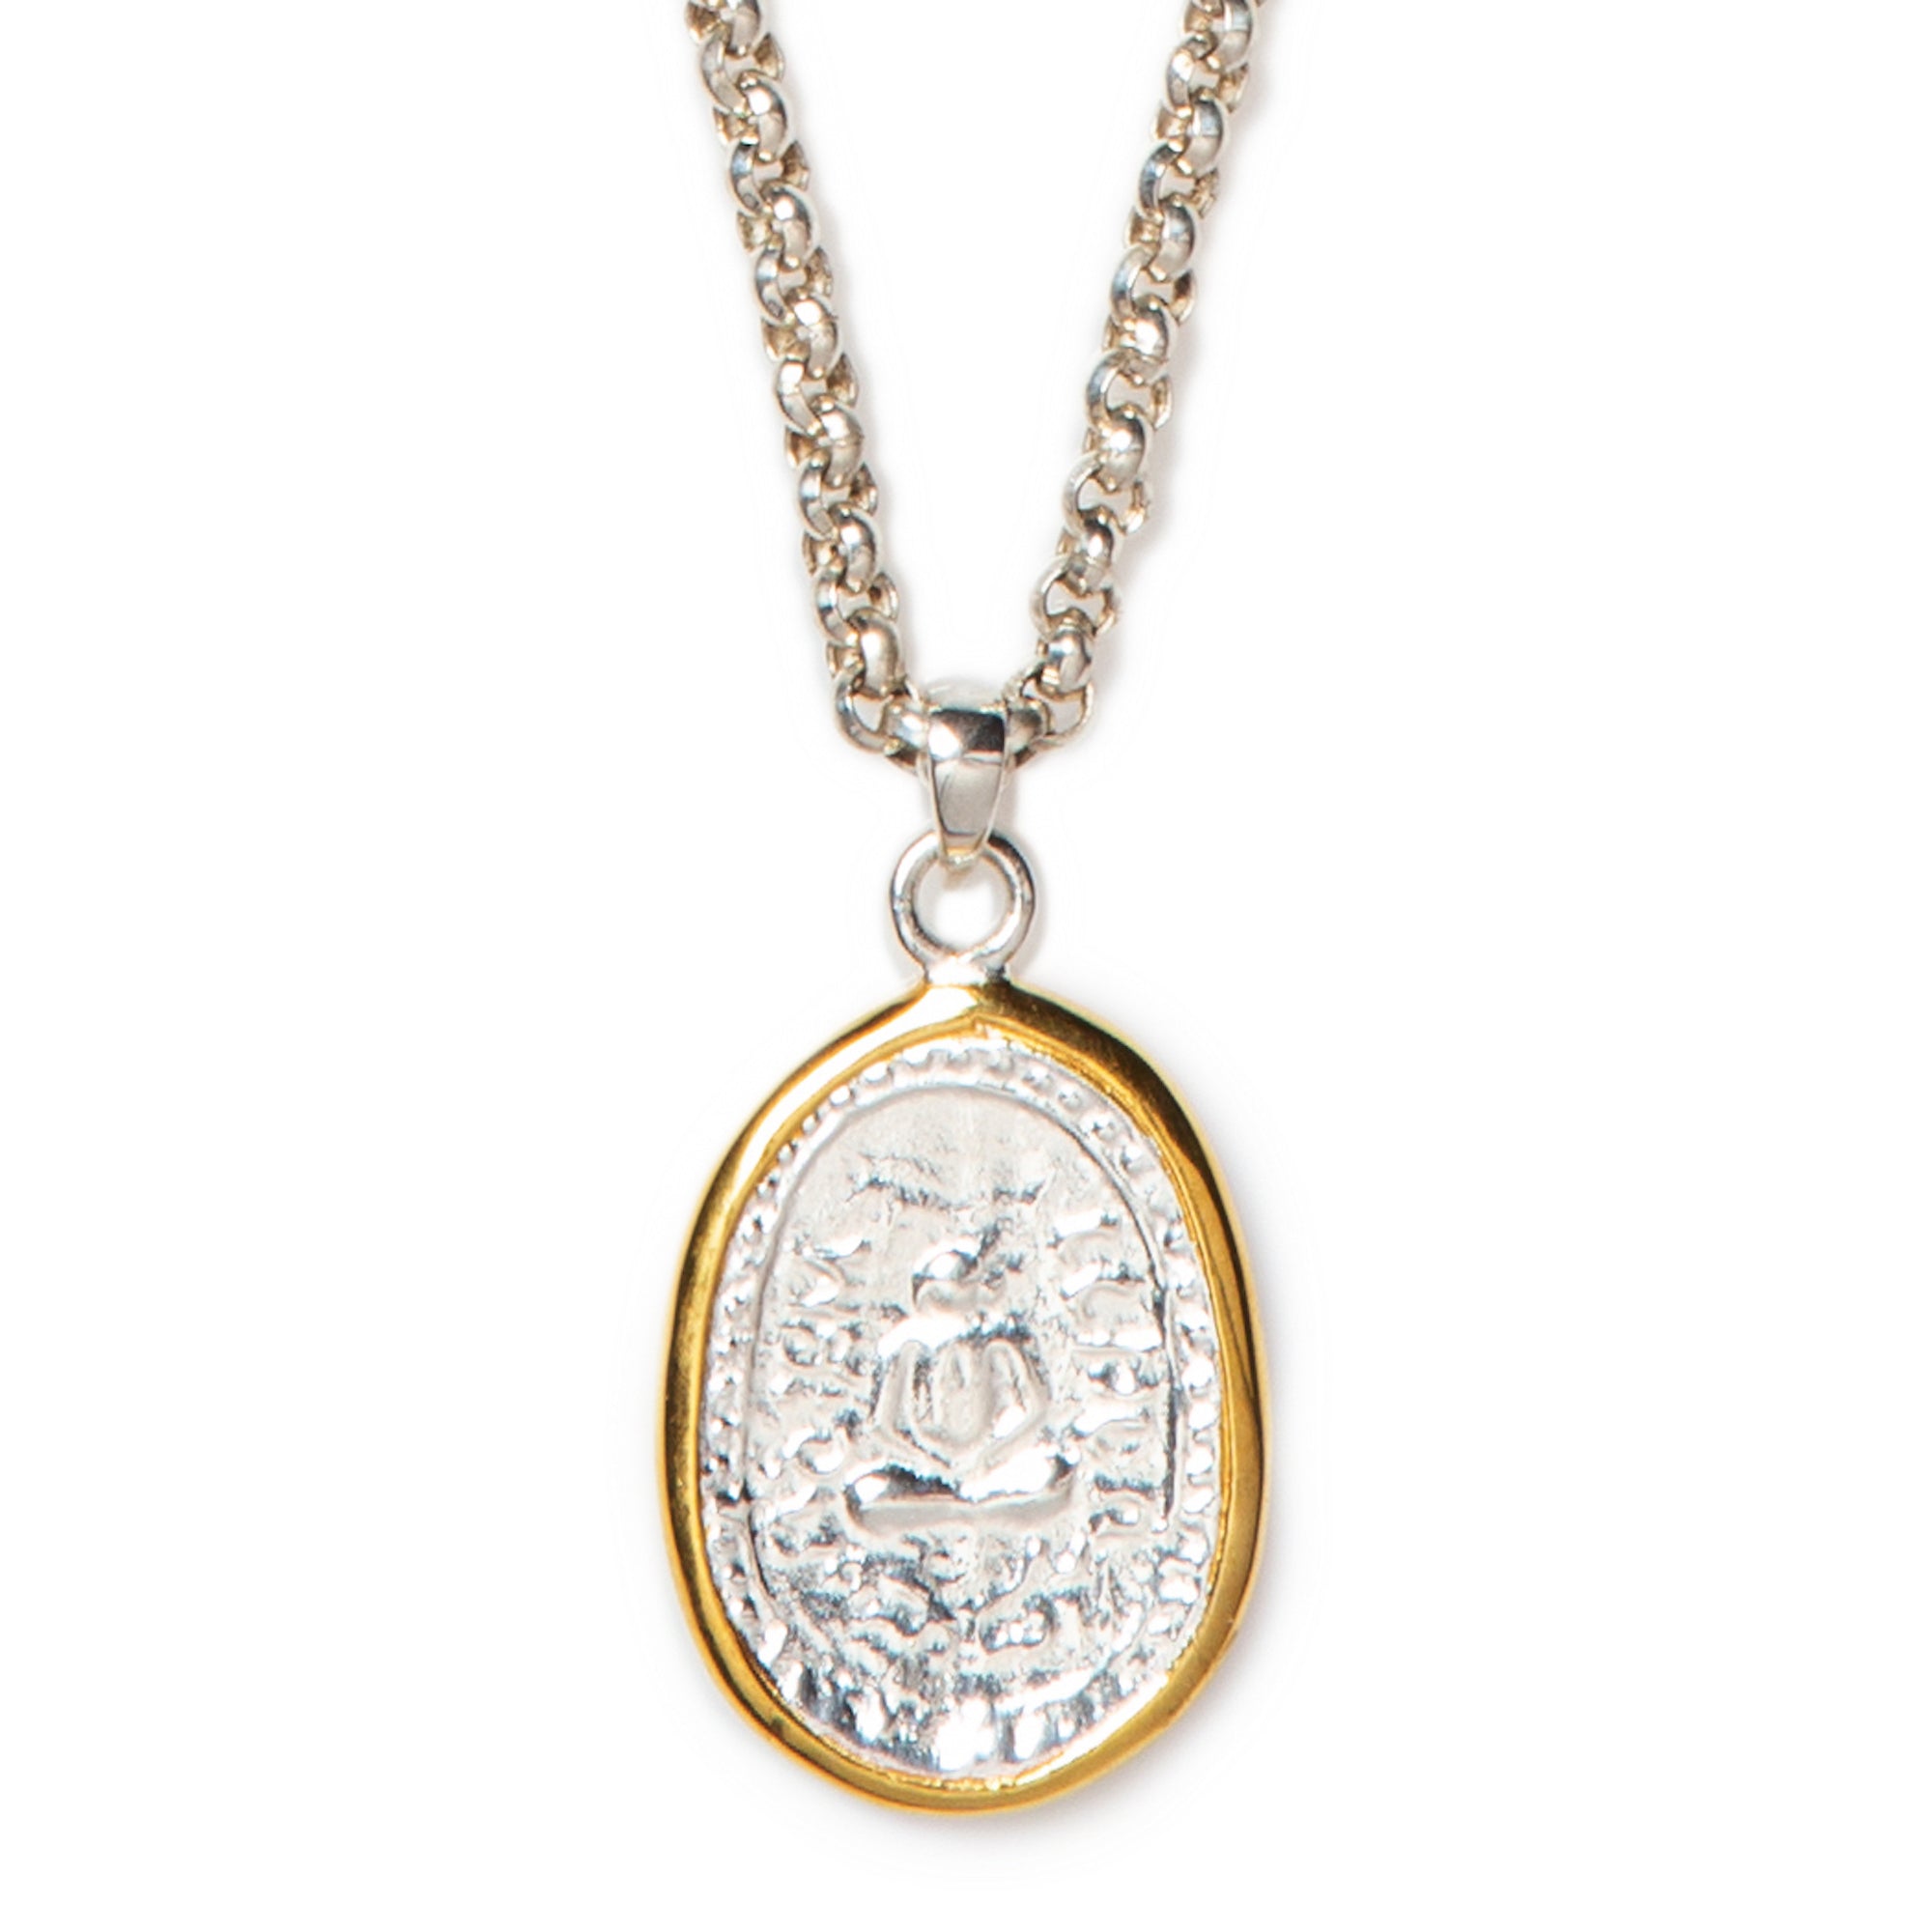 Beautiful 18" sterling silver round box-link chain with 22K gold-wrapped sterling silver authentic Thai amulet pendant.